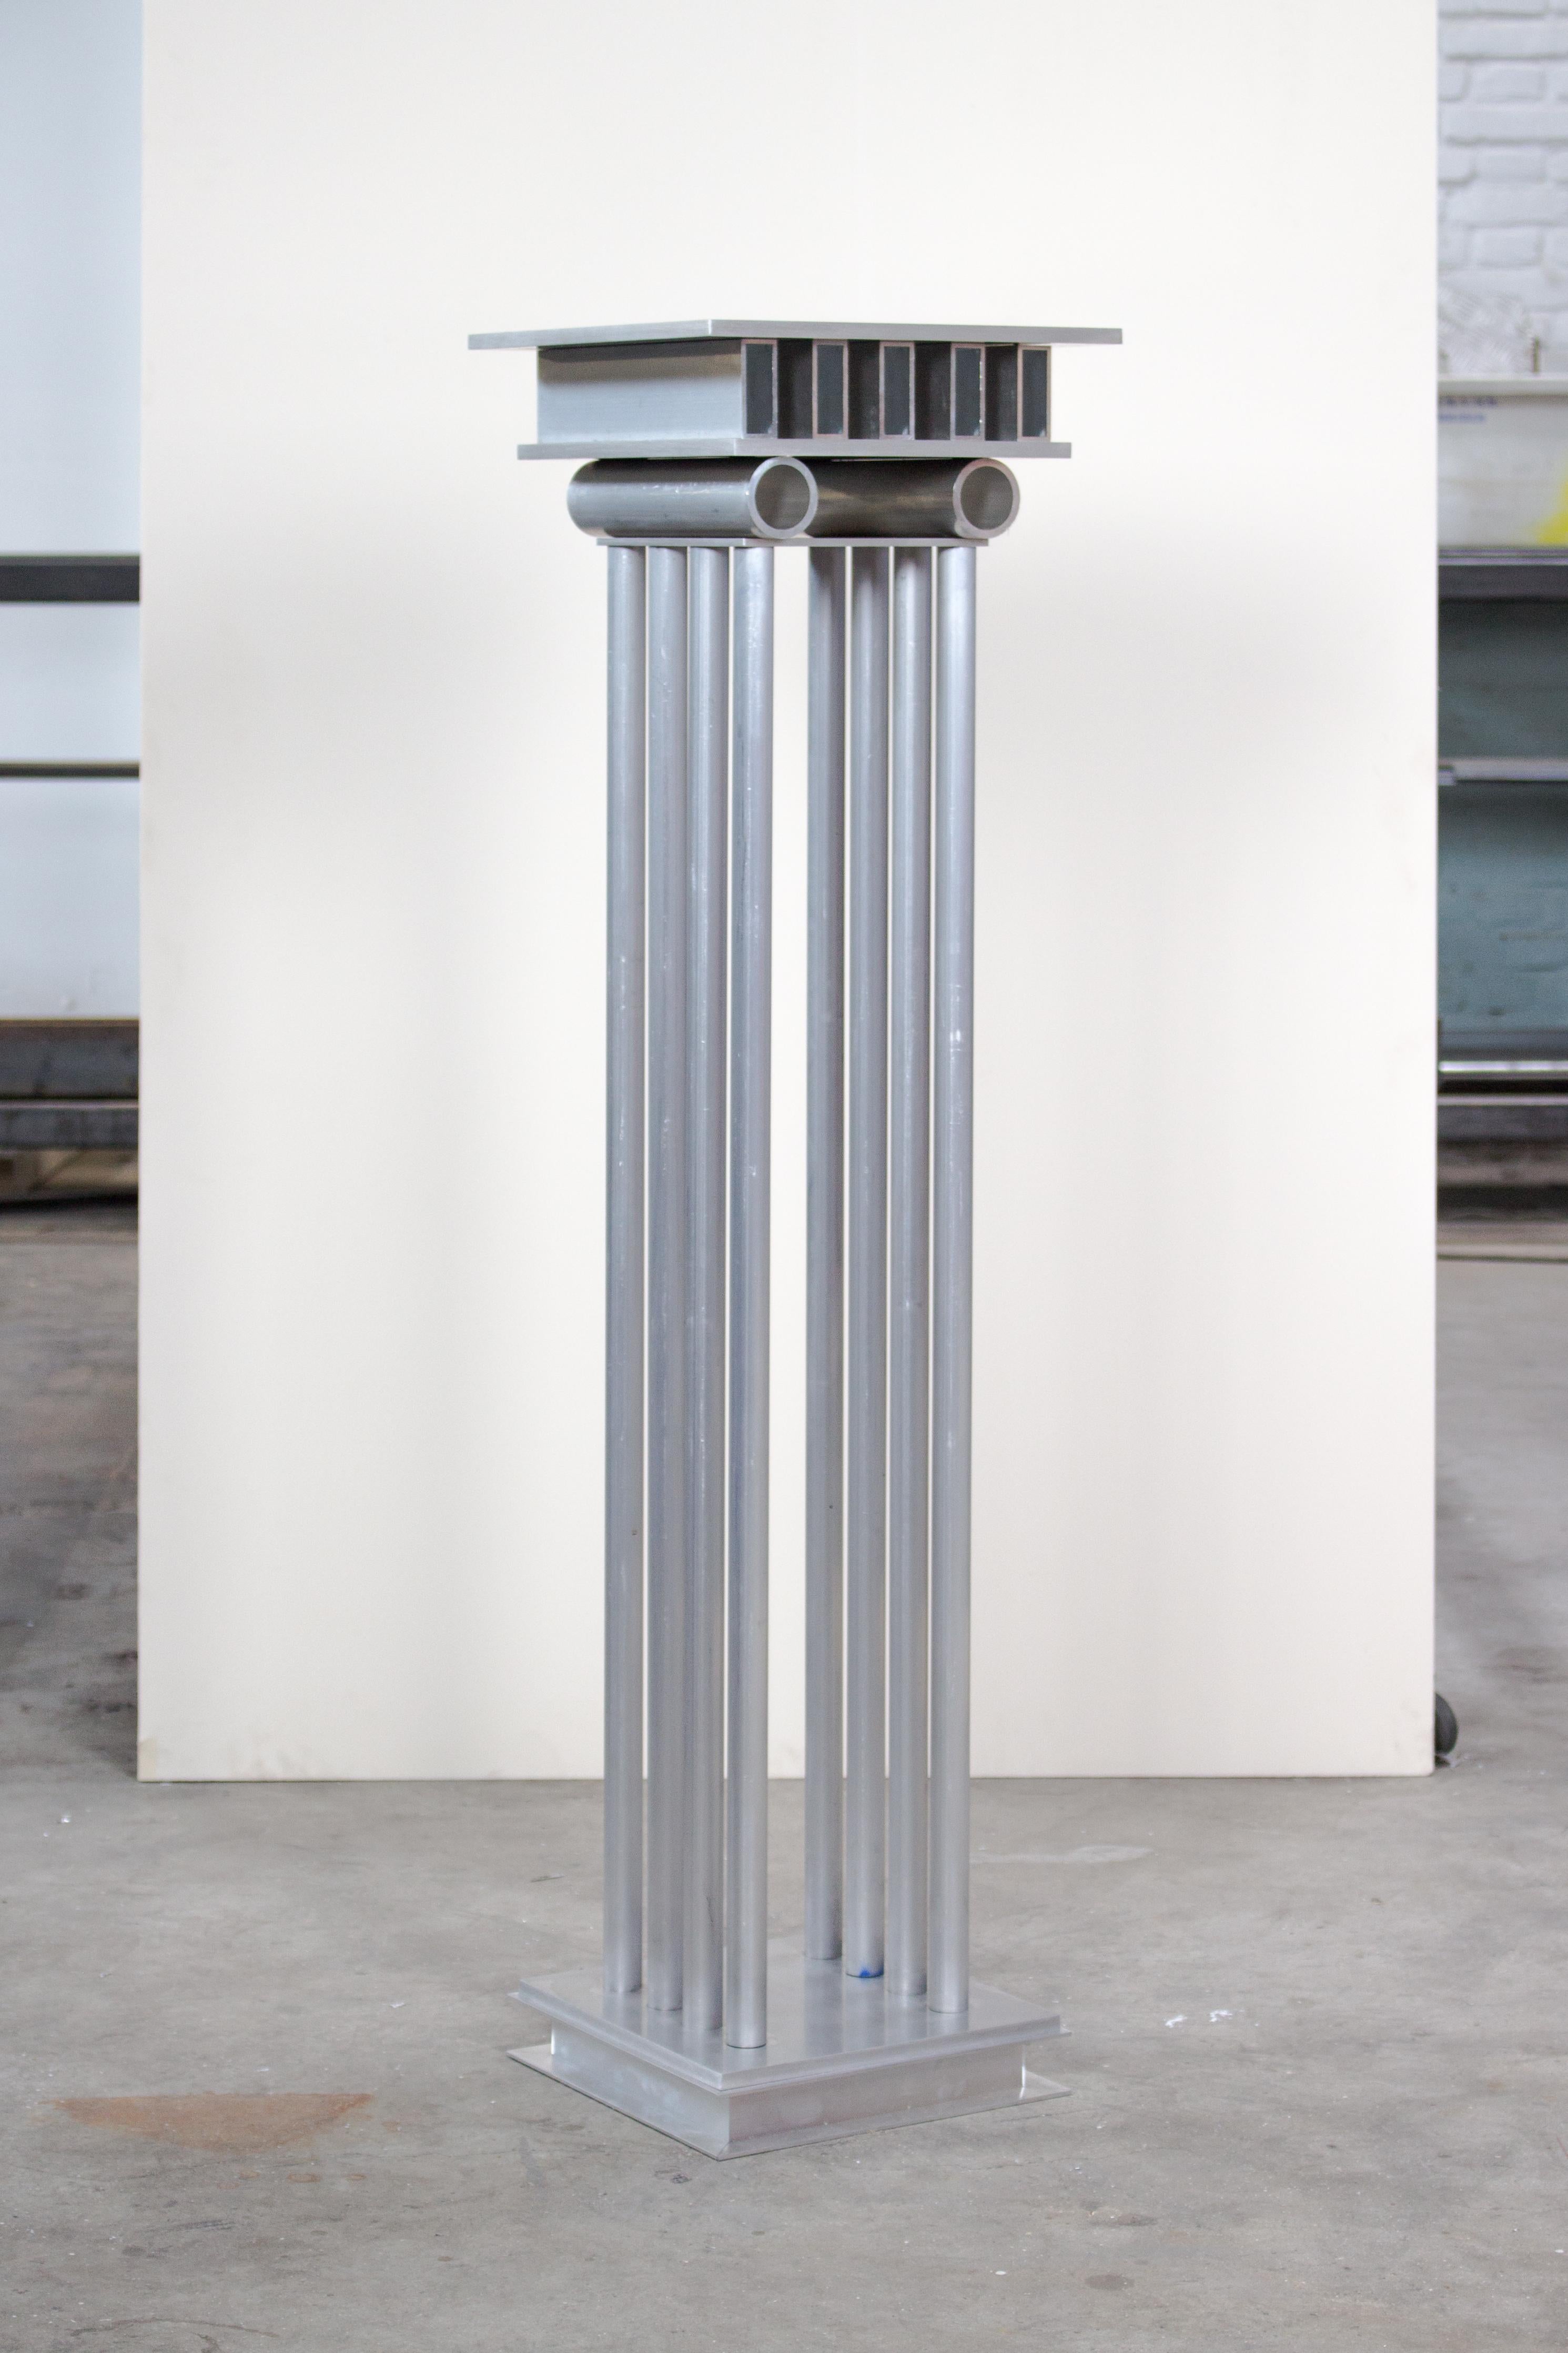 Metope Column by Joachim-Morineau Studio
Dimensions: H 110 x D 30 x W 30 cm, 18 kg
Materials: Aluminium tubes, profiles, screws and sheets
Possibility to have a different colour/finish (such as blasted or anodized aluminium).

THOLOS, PTERON